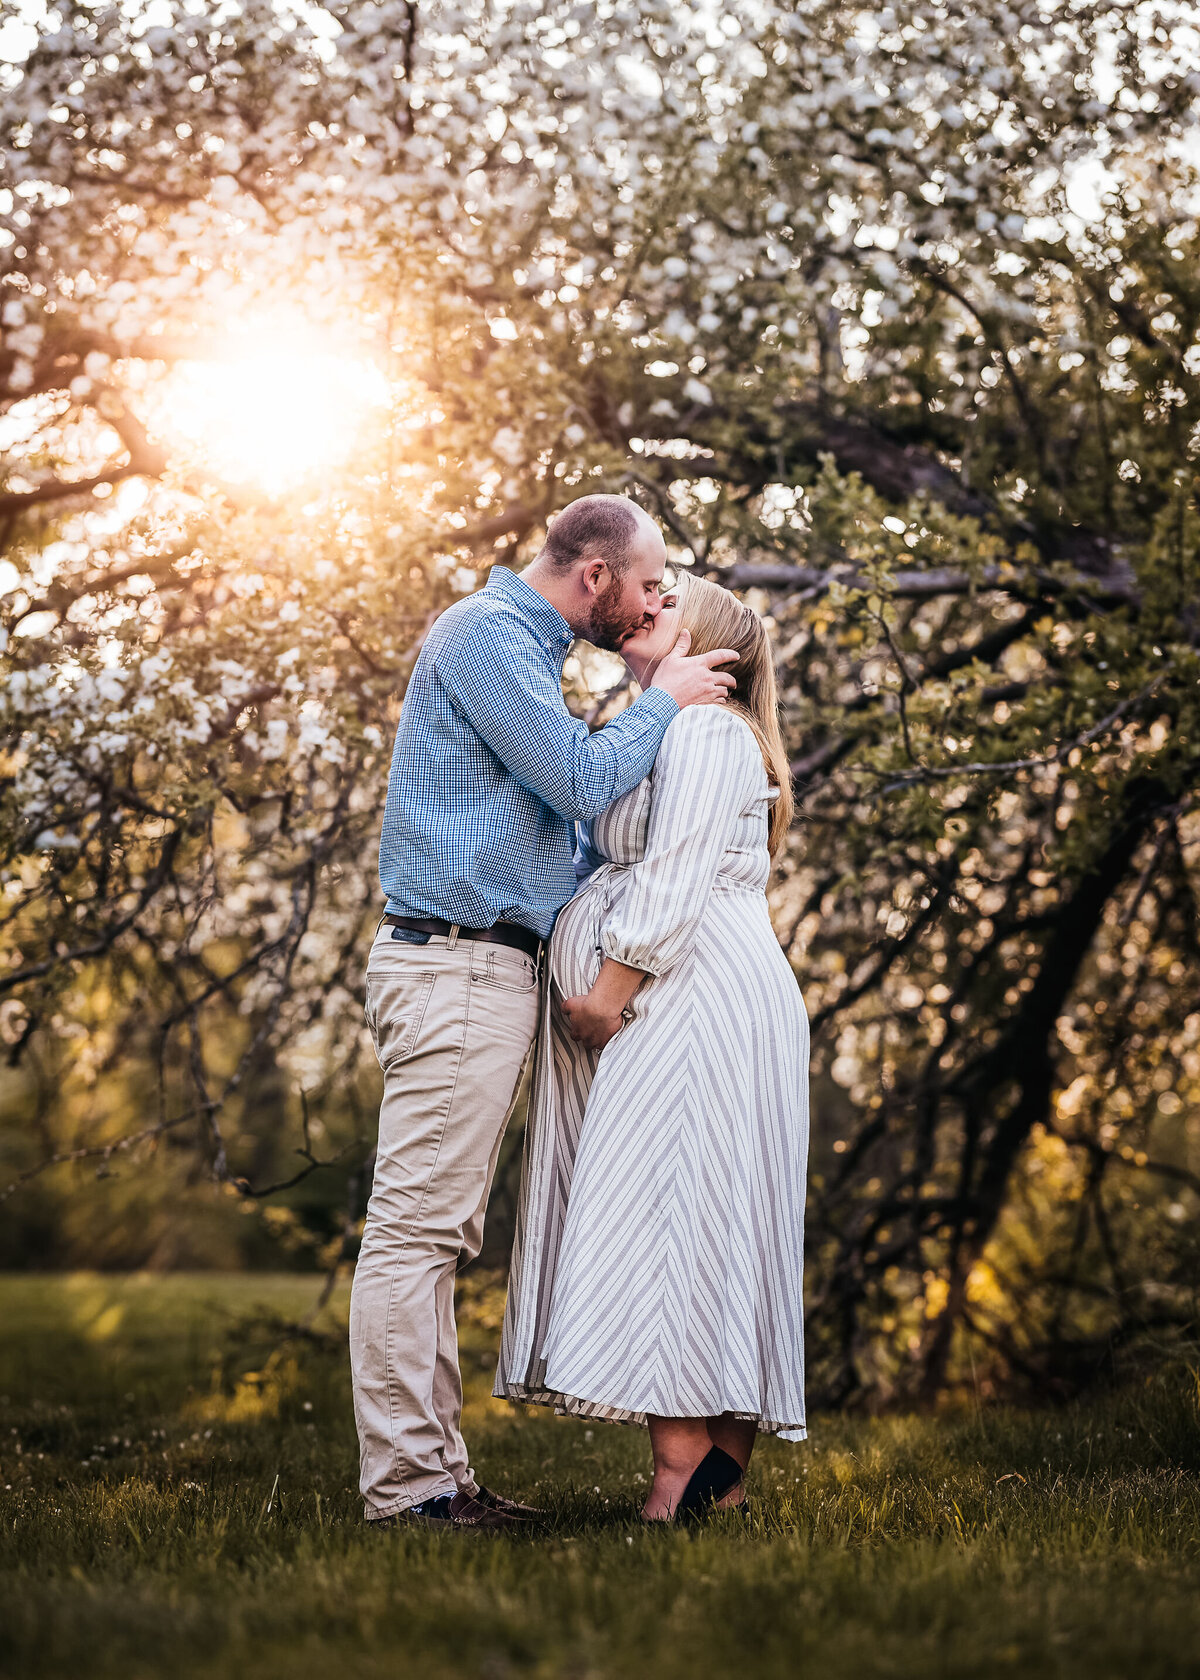 Maternity photo session at sunset with couple kissing in front of blooming trees at carey cottage in portsmouth NH by Lisa Smith Photography